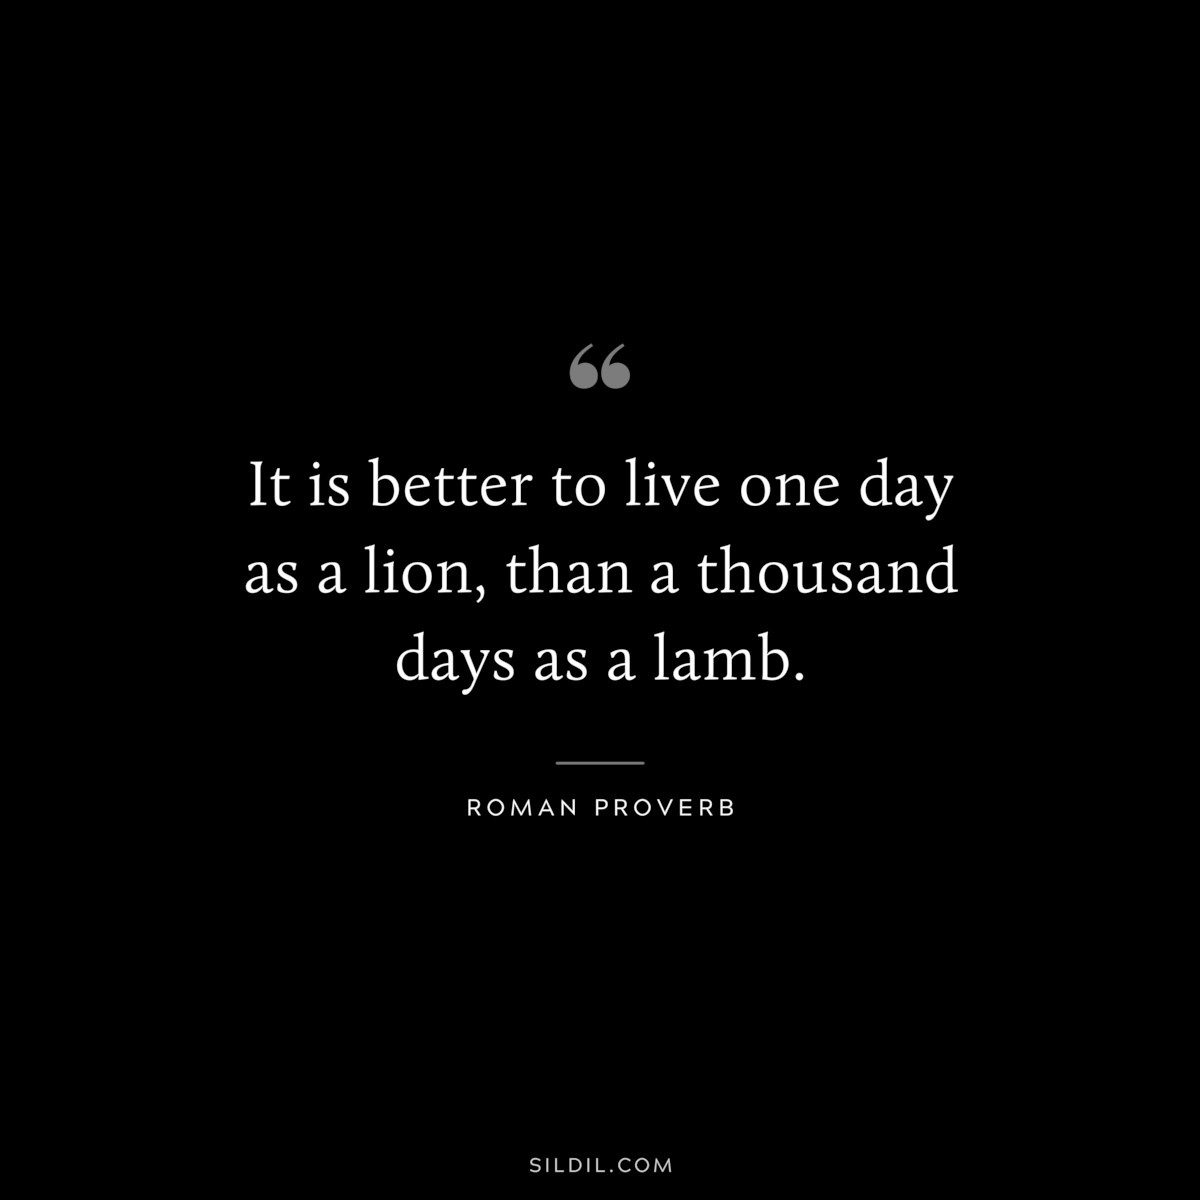 It is better to live one day as a lion, than a thousand days as a lamb. ― Roman Proverb